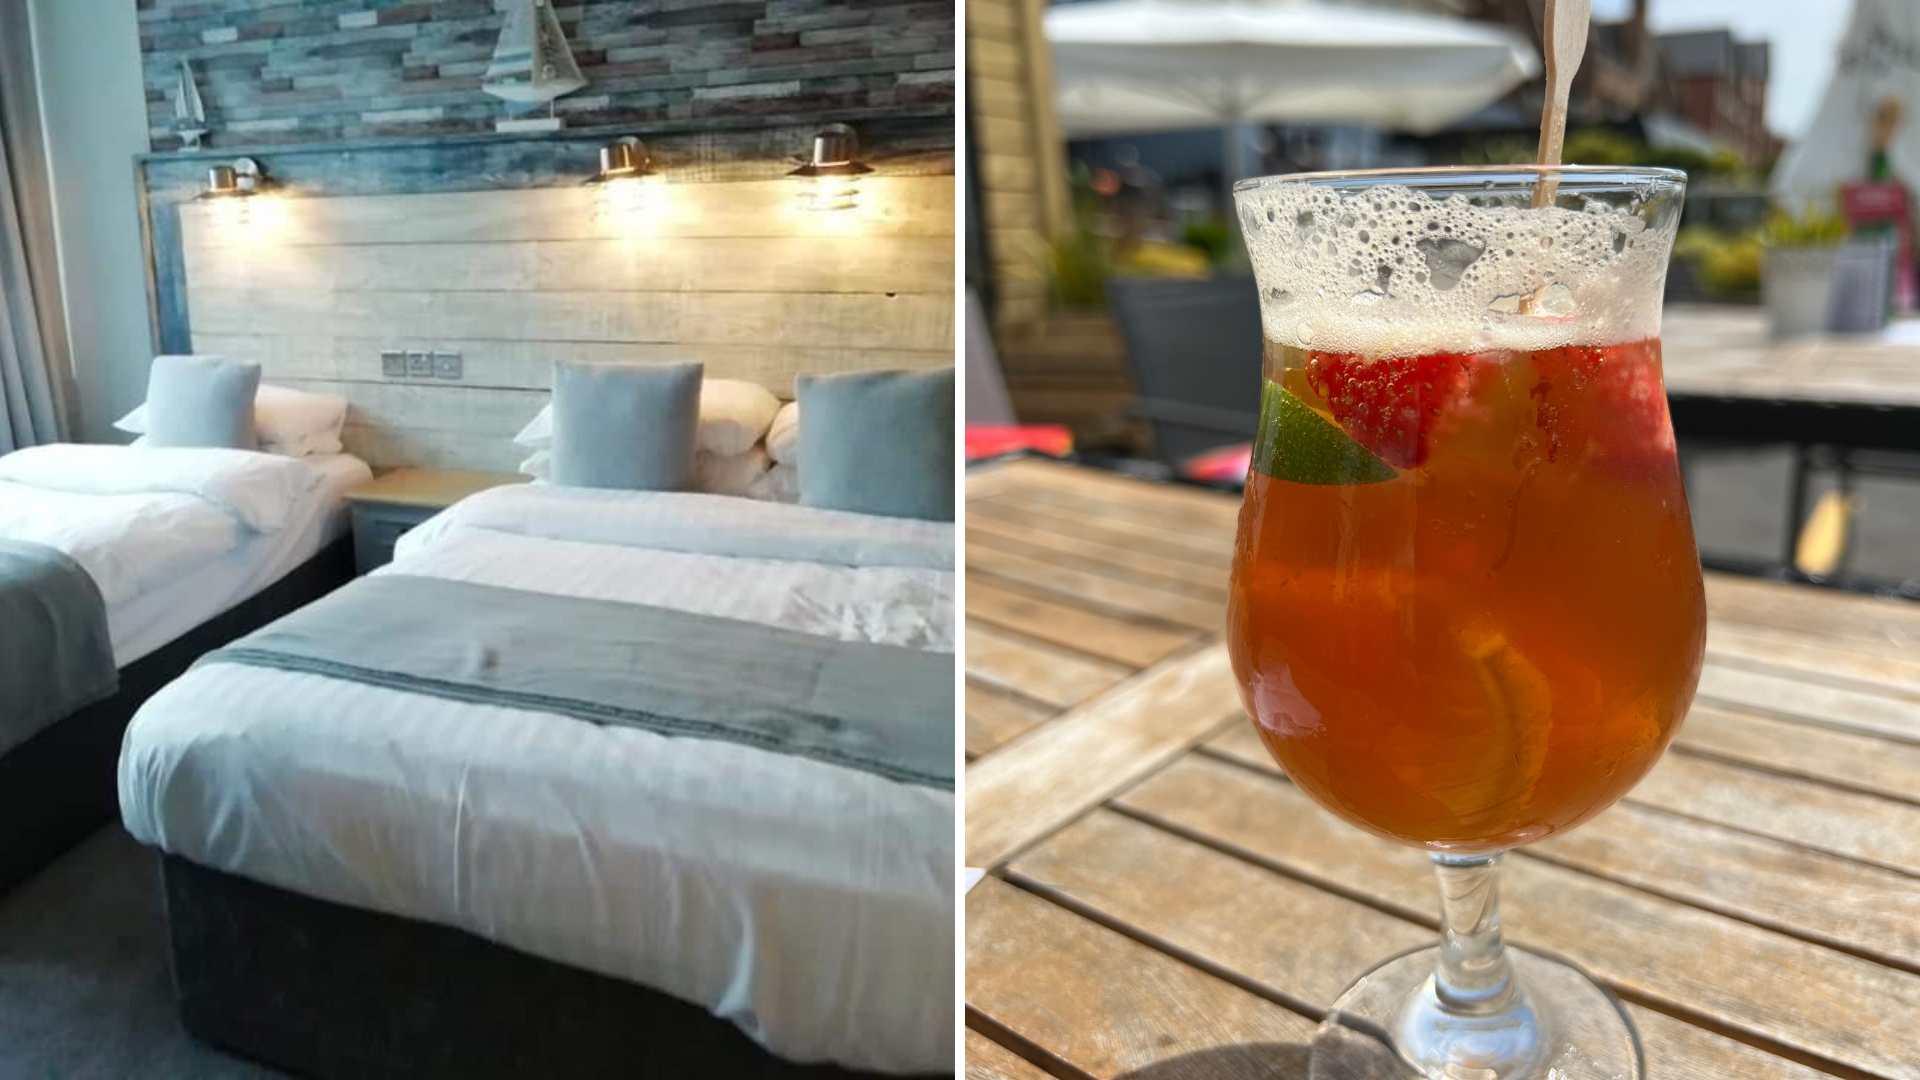 Inn on the prom - bedroom and drink